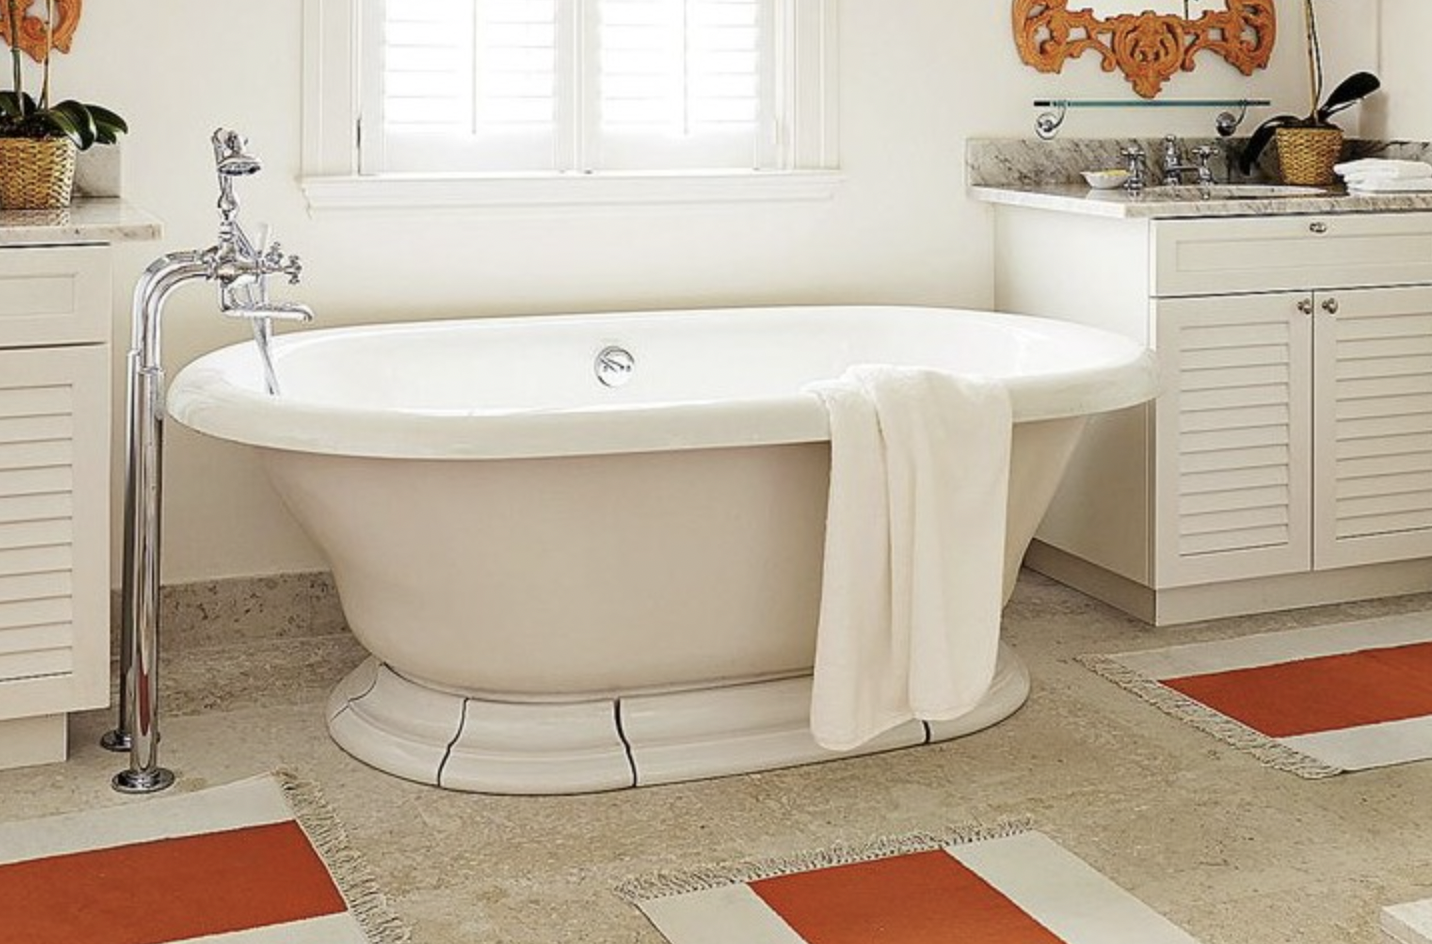 The Most Impressive Upgrades You Can Make in Your Bathroom